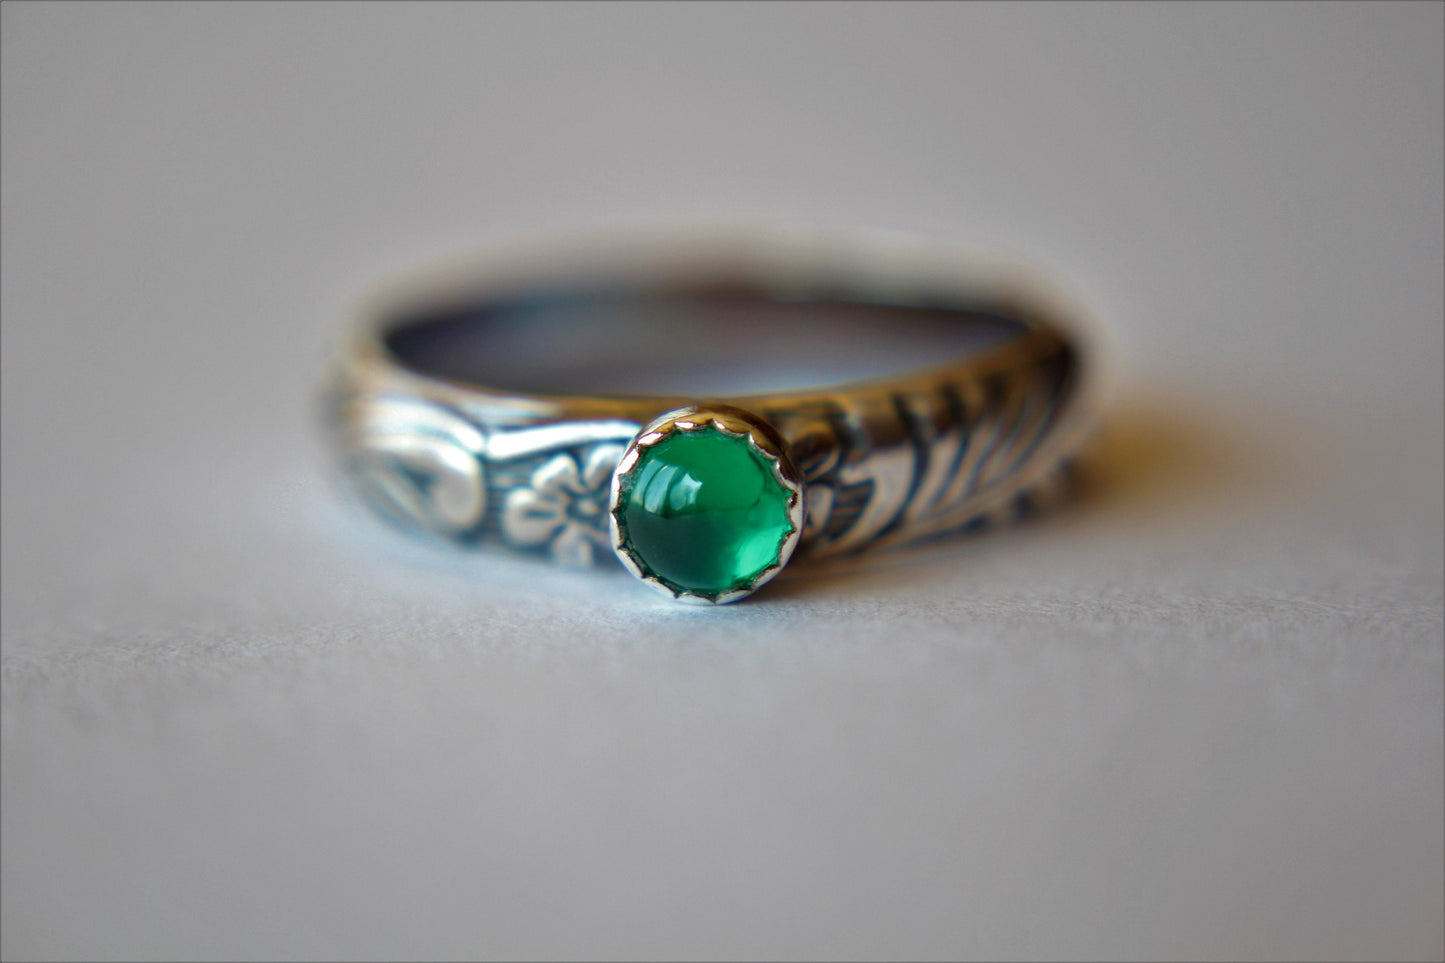 Emerald Ring, Floral Emerald Ring, May Birthstone Ring, Boho Ring, Stacking Ring, Floral Band, Green Stone, Boho Ring, Wide Band, Gift